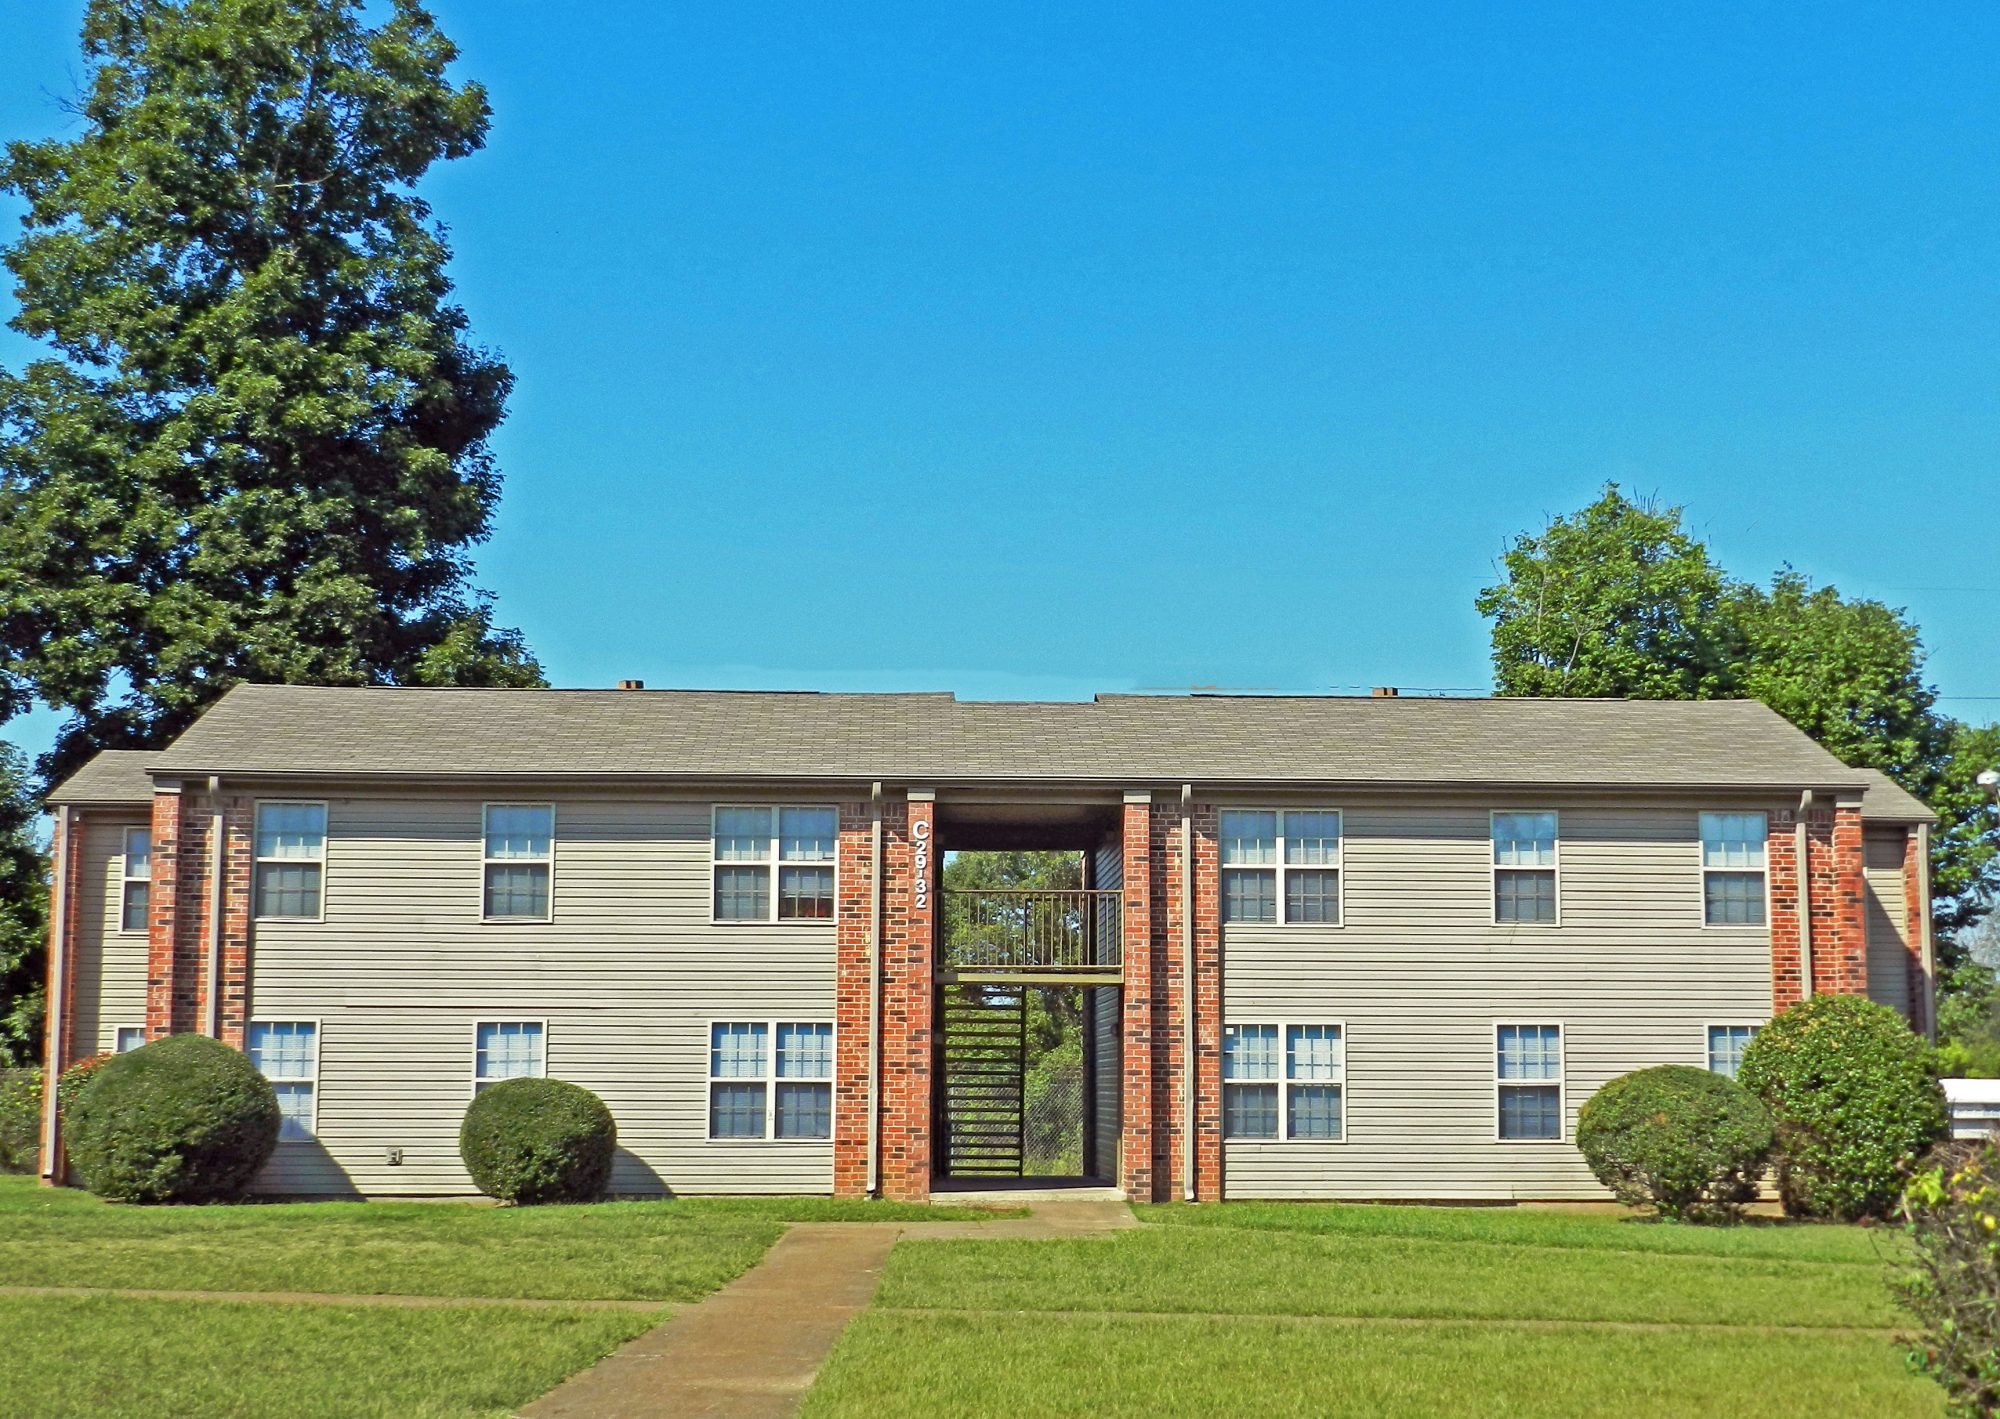 EAST POINTE APARTMENTS